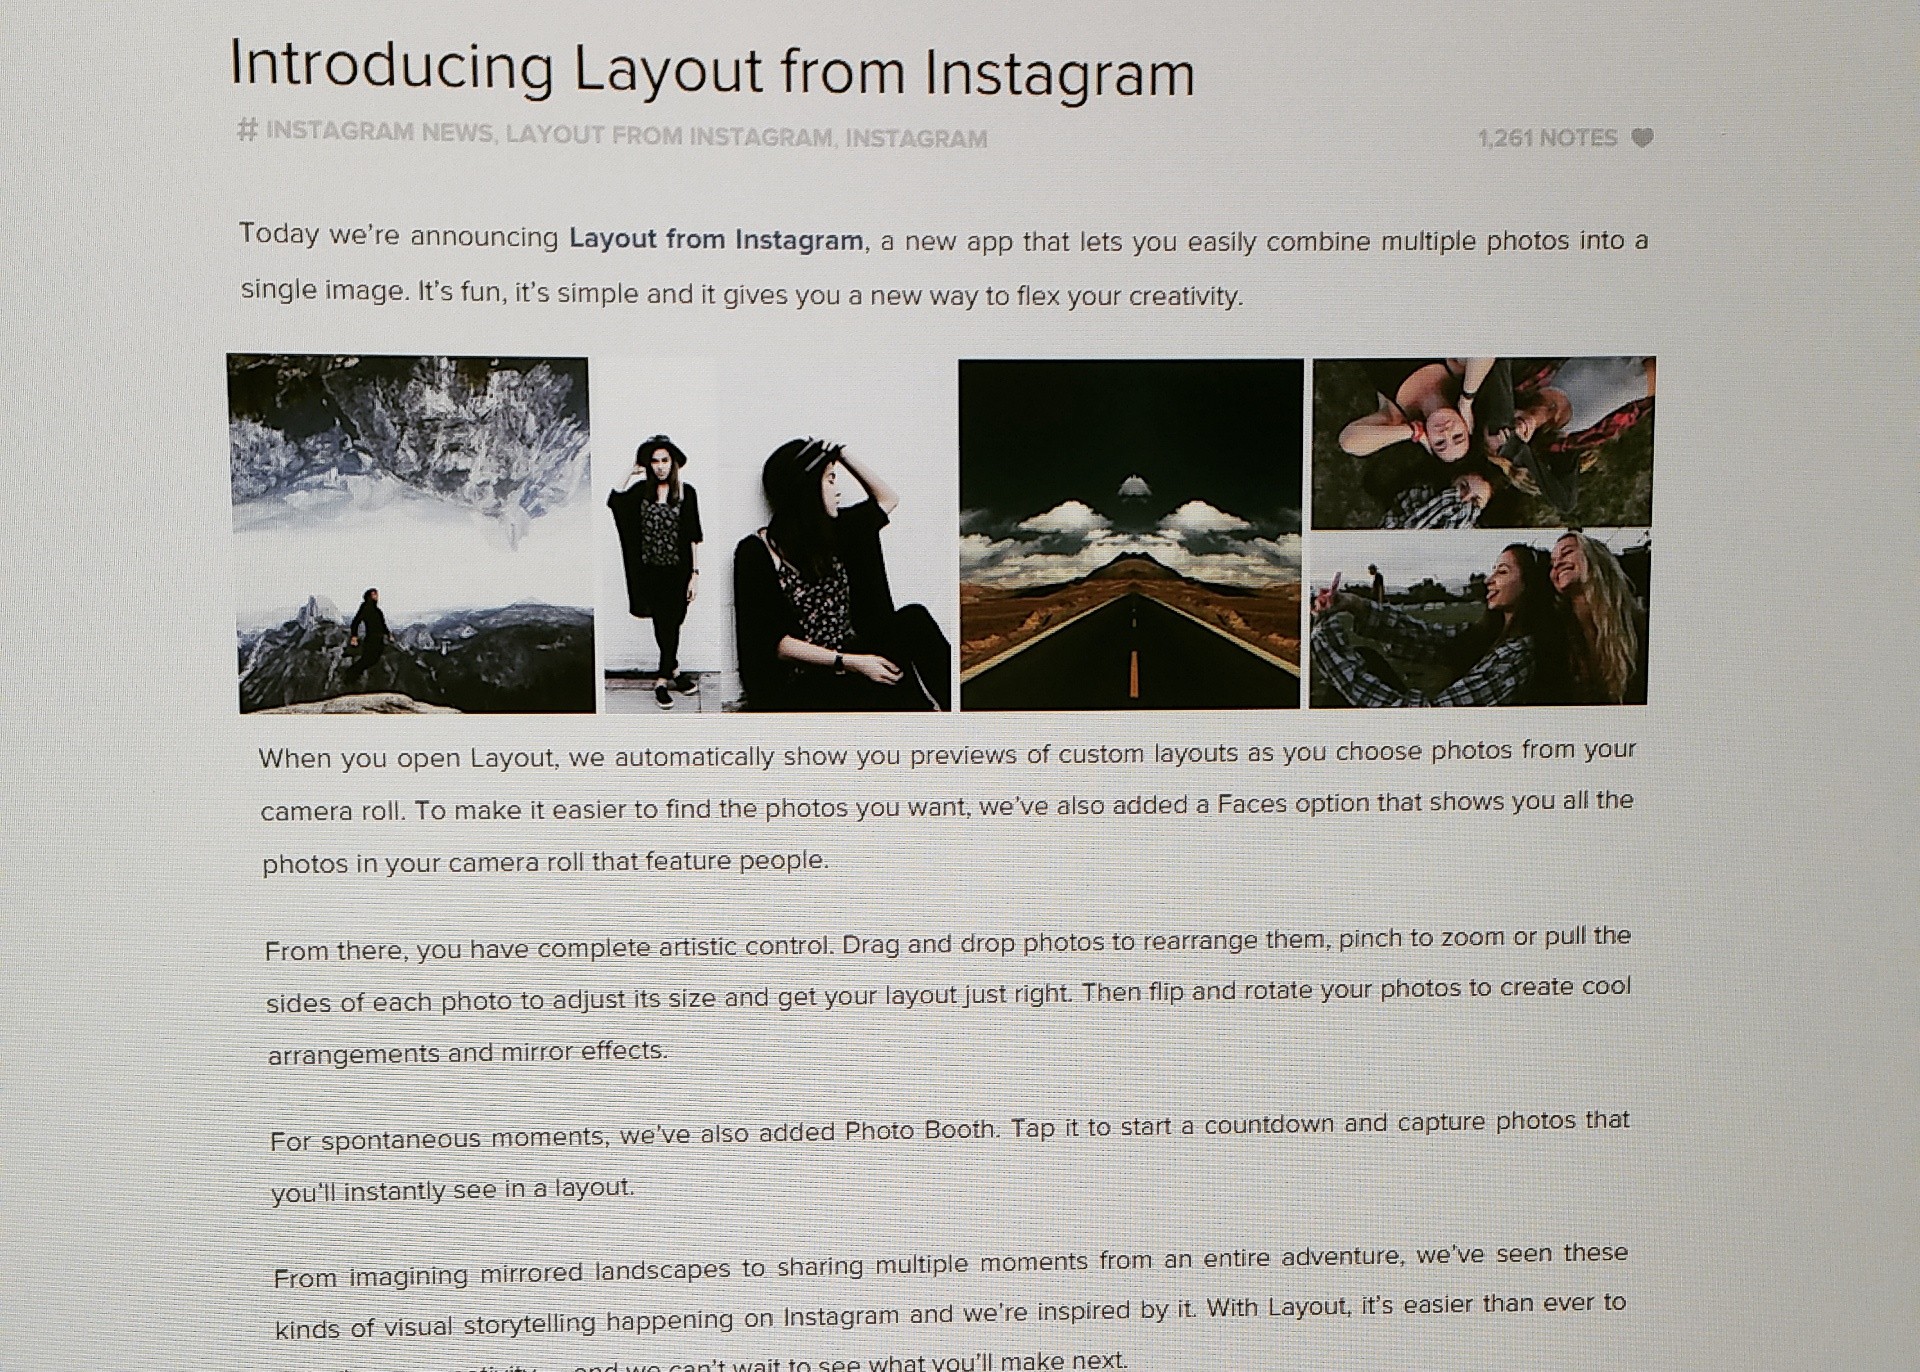 New layout App from Instagram!